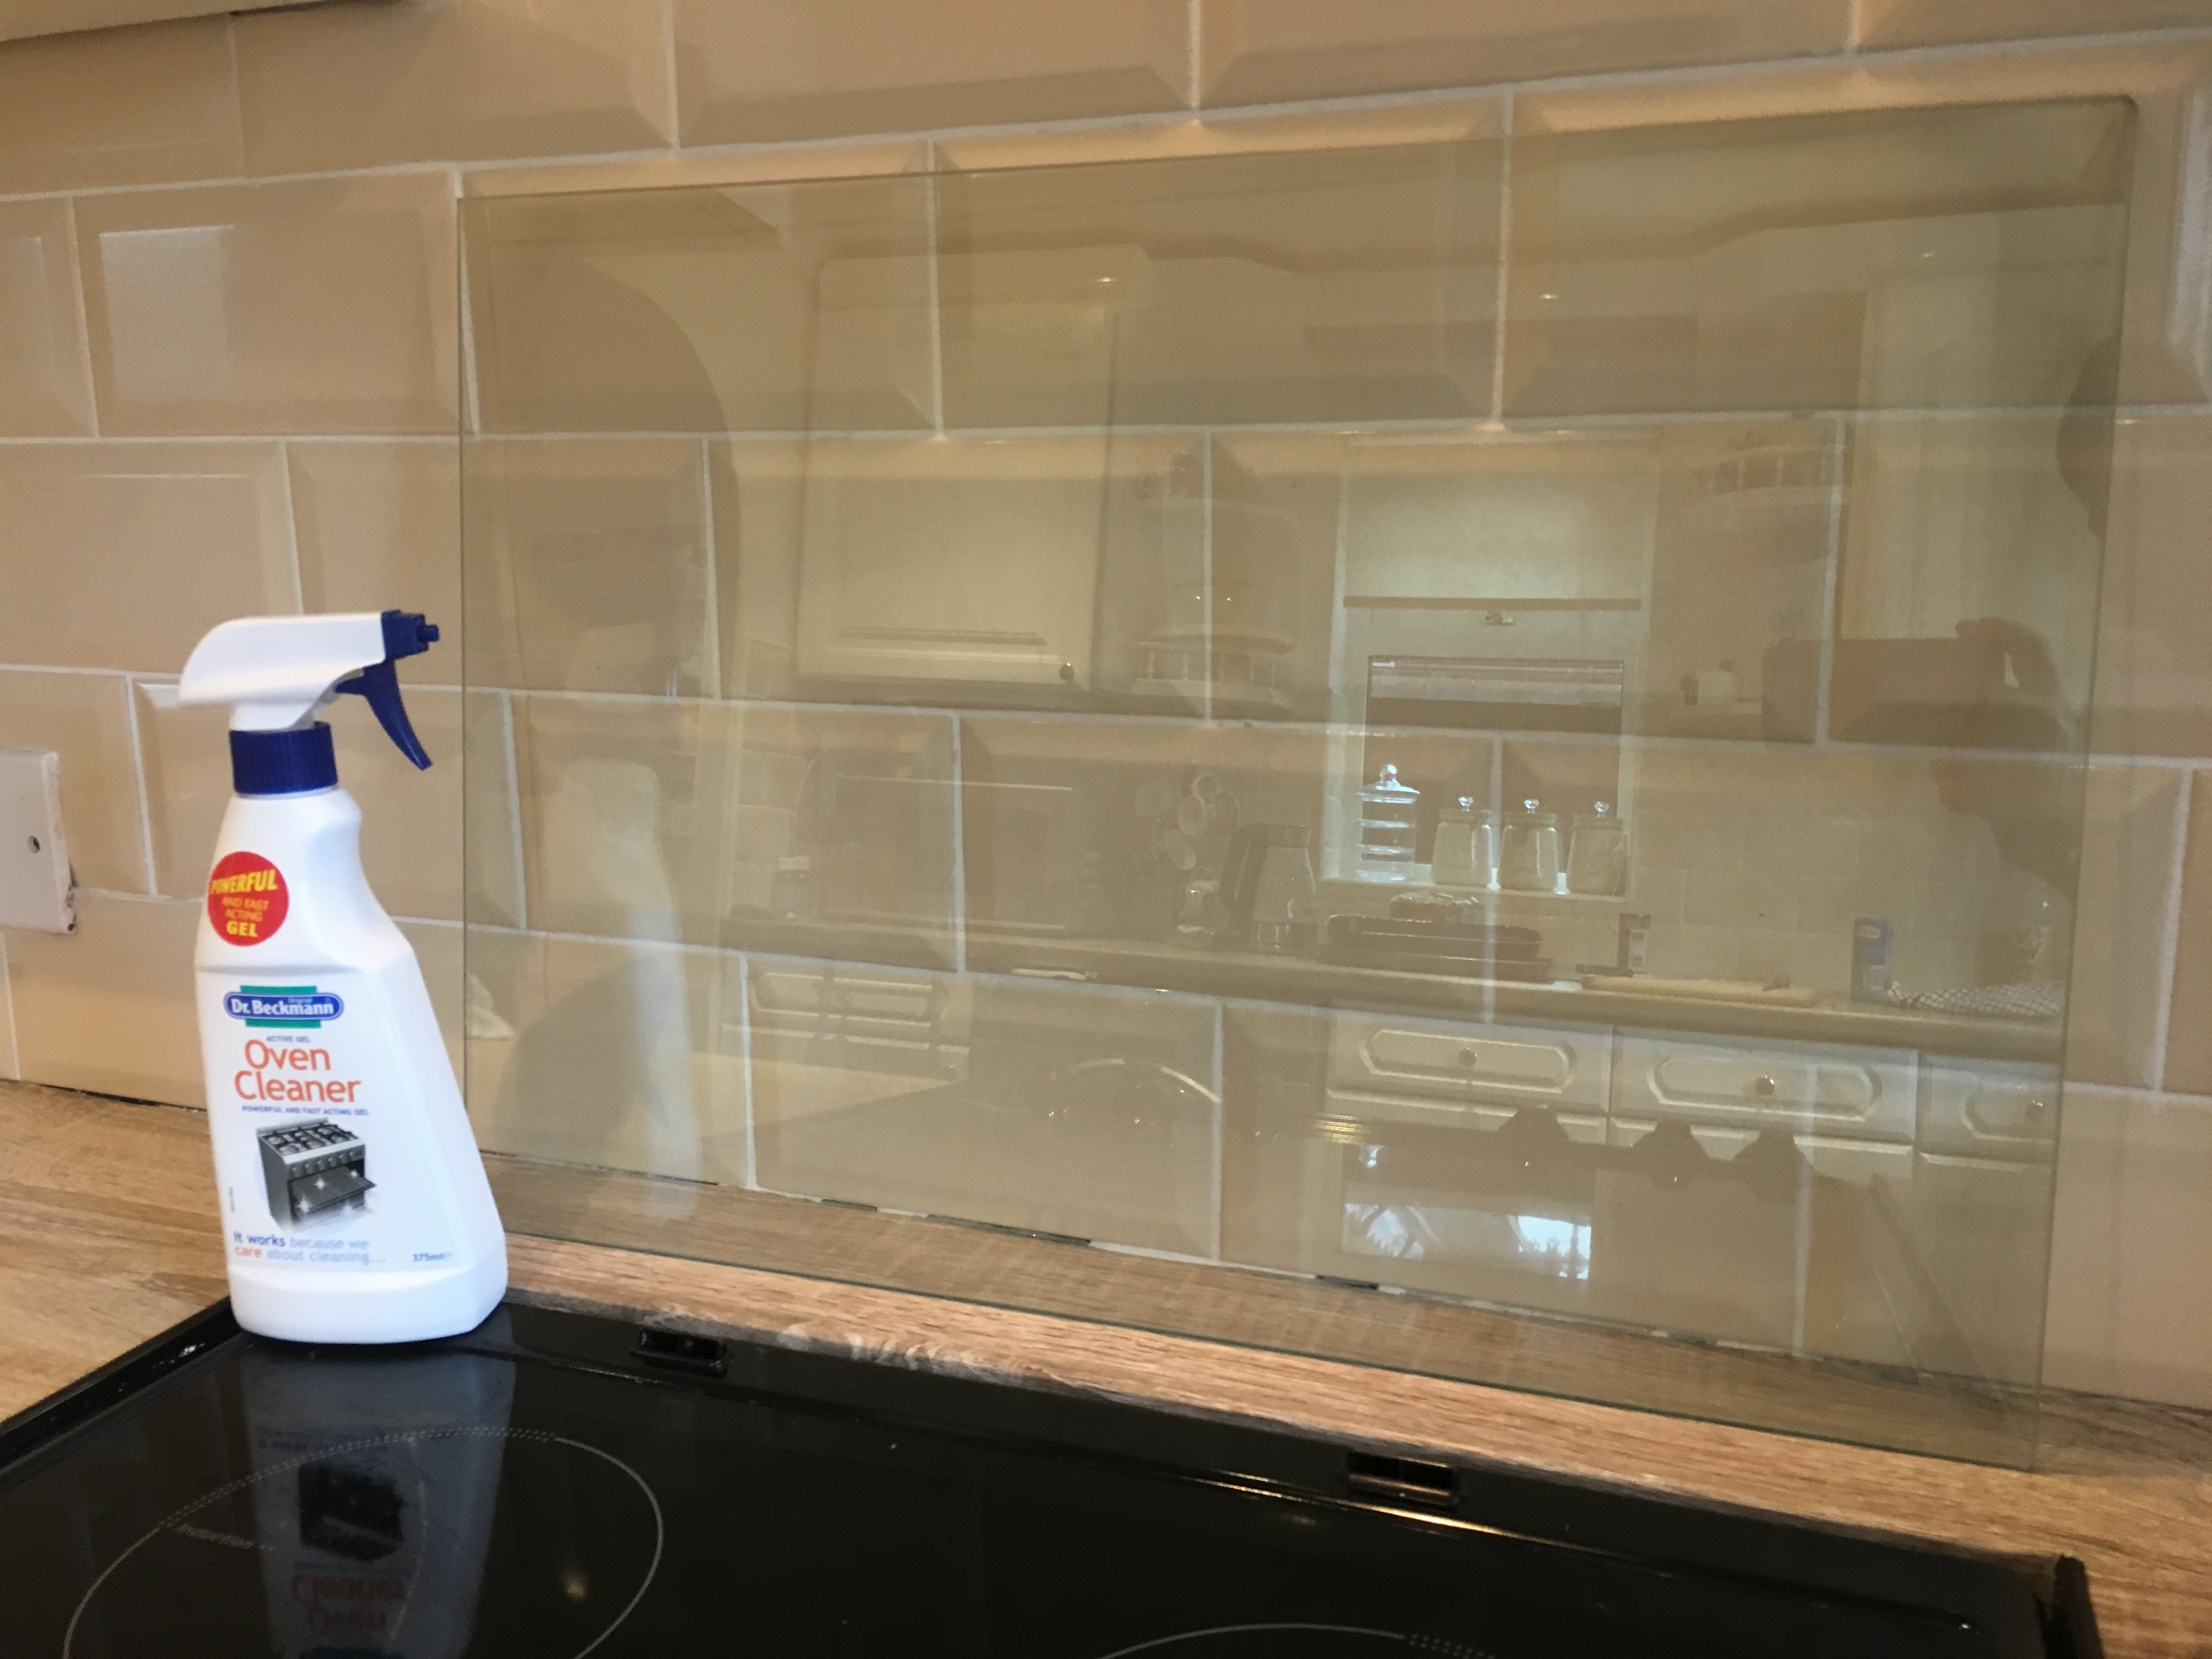 Dr. Beckmann Oven Cleaner - Paula's Projects